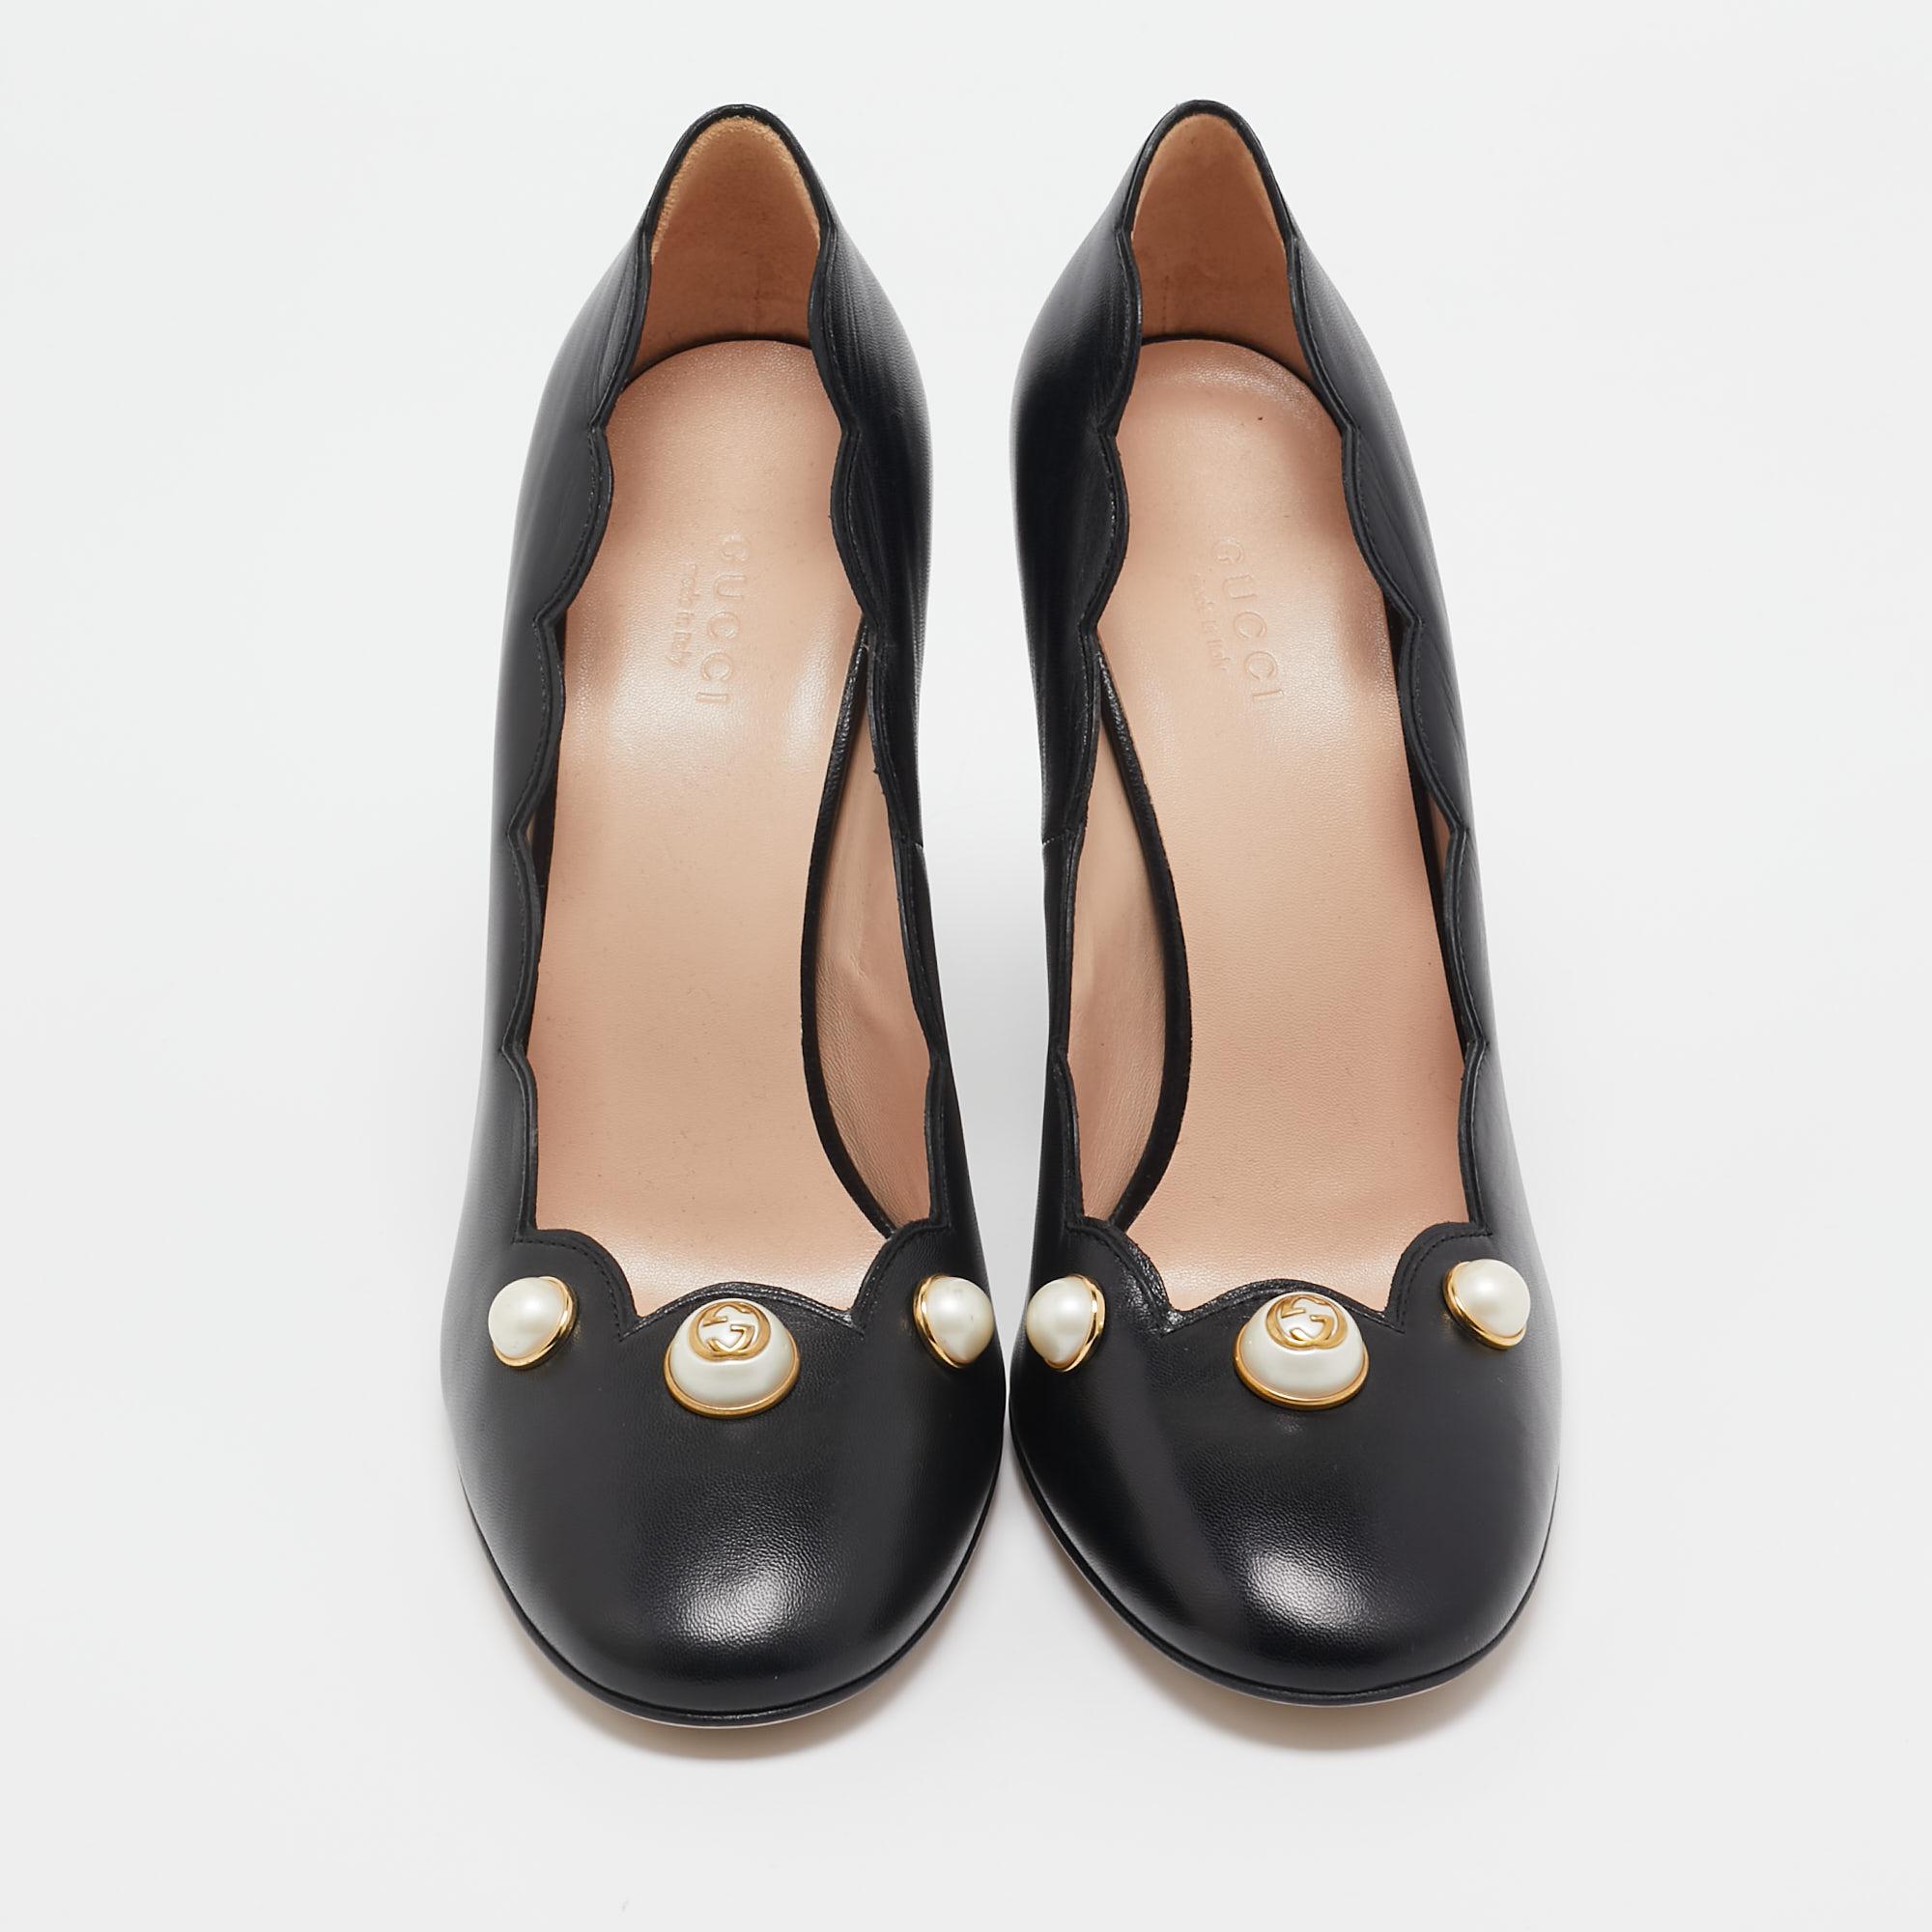 Gucci Black Leather GG Pearl Detail Pumps Size 39.5 3